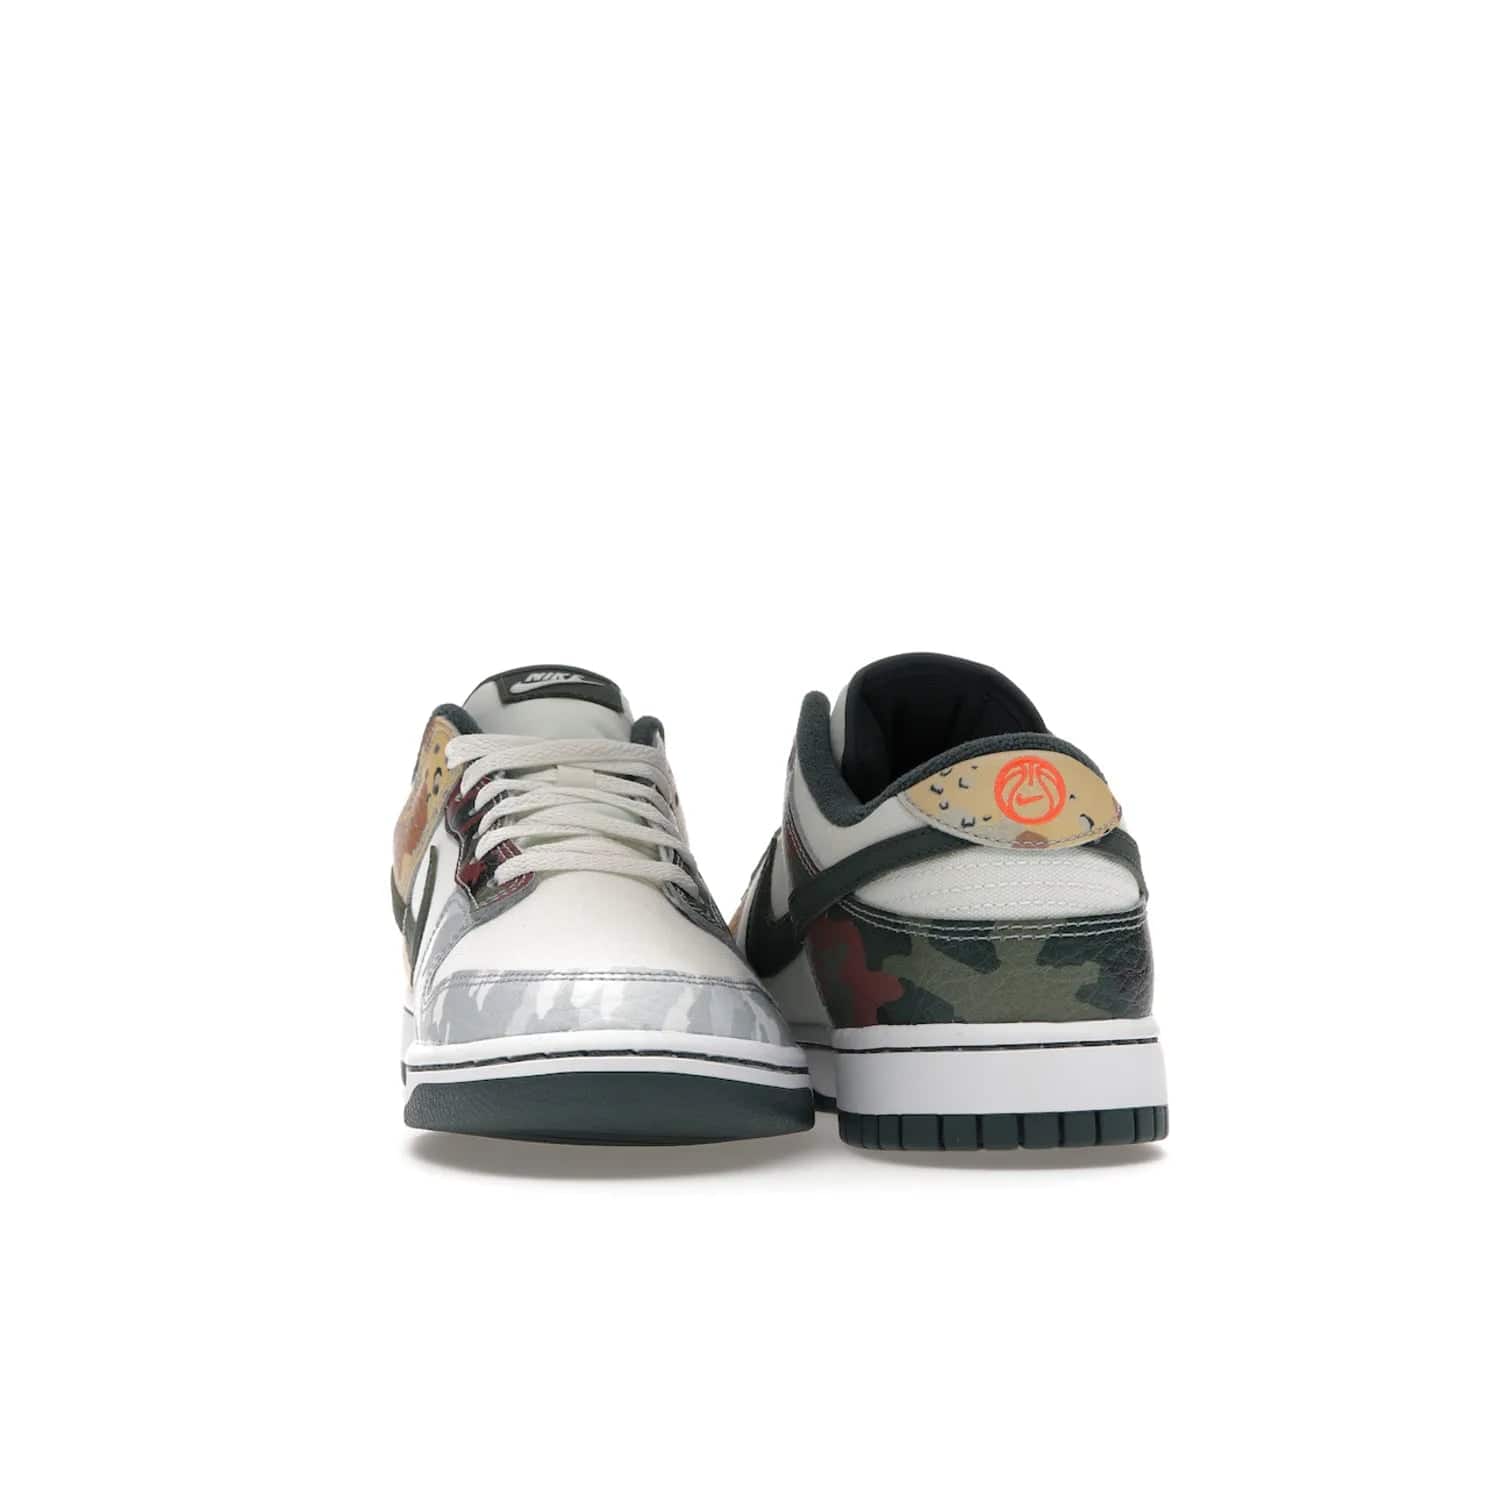 Nike Dunk Low SE Sail Multi-Camo - Image 27 - Only at www.BallersClubKickz.com - Classic design meets statement style in the Nike Dunk Low SE Sail Multi-Camo. White leather base with multi-color camo overlays, vibrant Nike Swooshes, and orange Nike embroidery. Get yours August 2021.